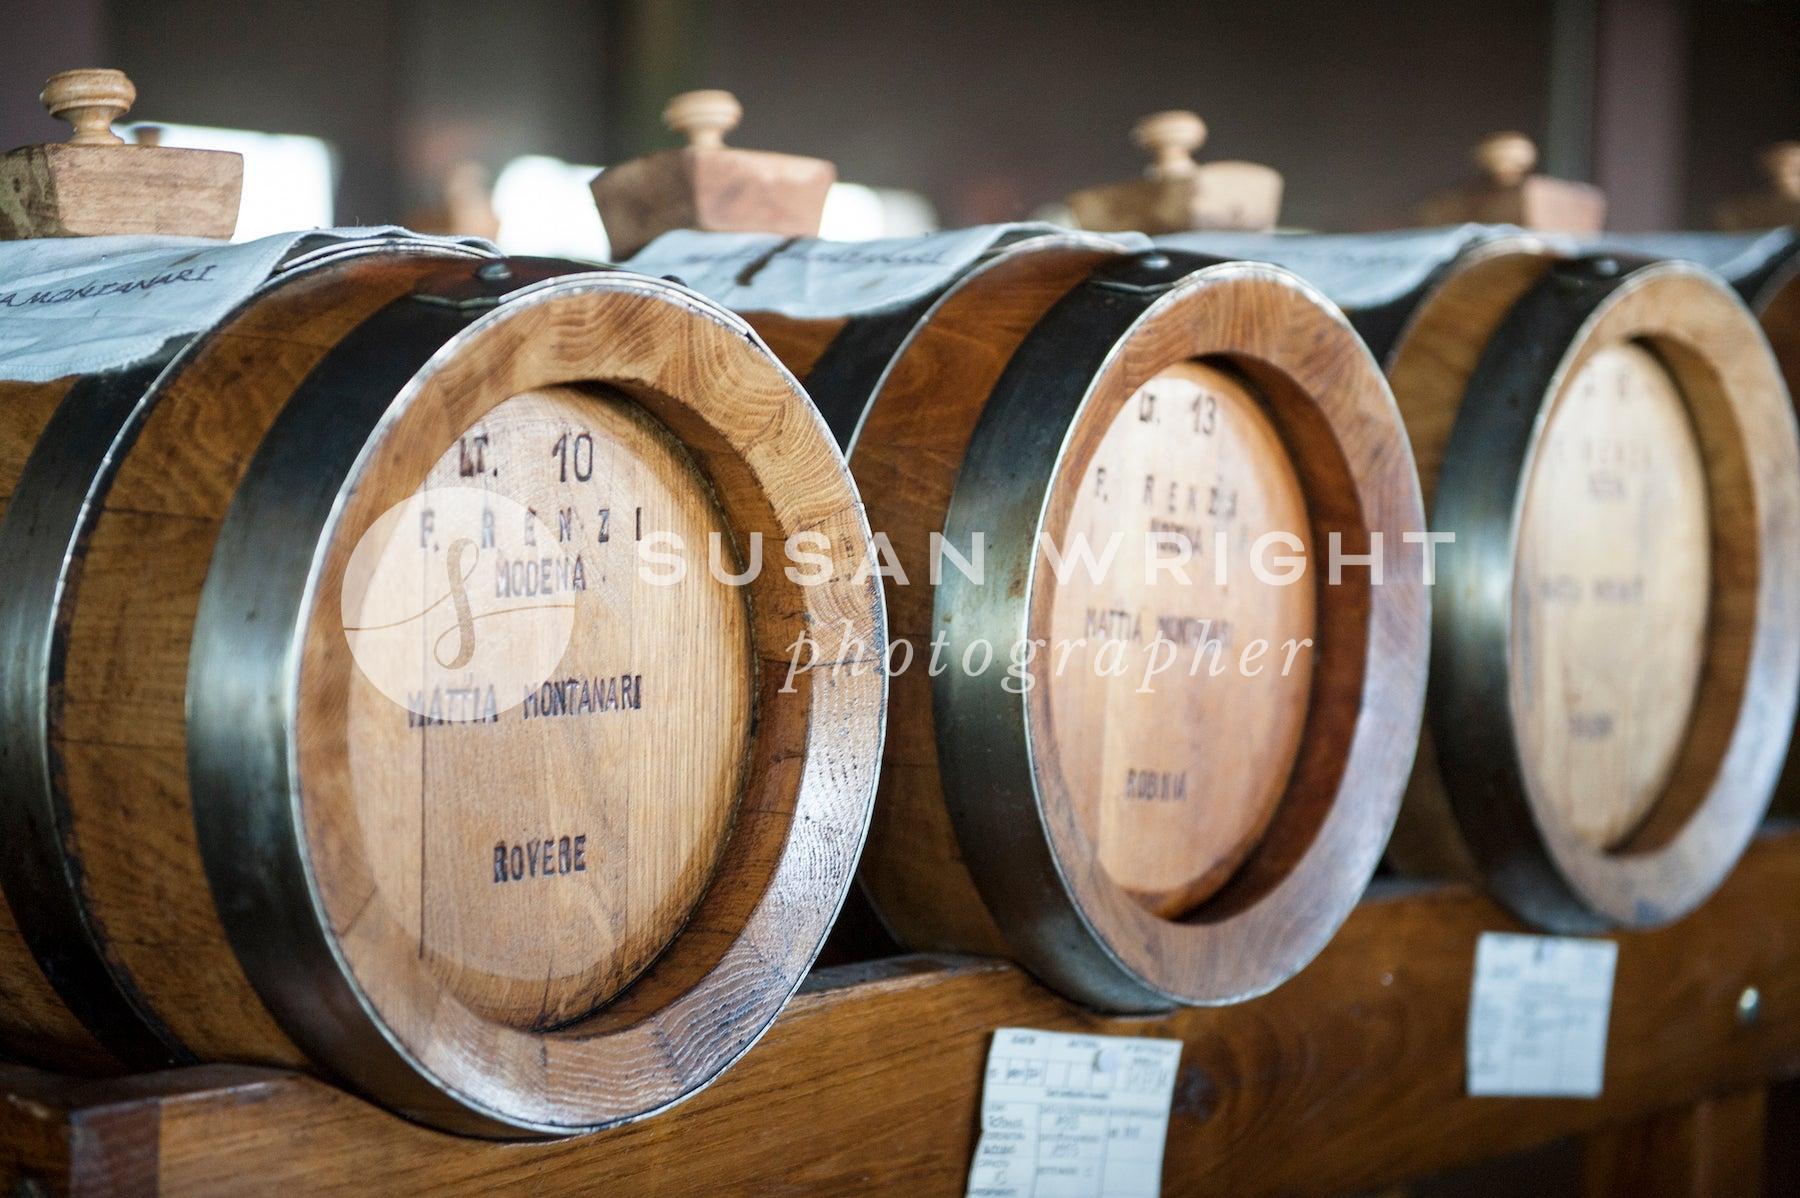 Traditional Balsamic Vinegar of Modena -  by Susan Wright Images - Photo Essays